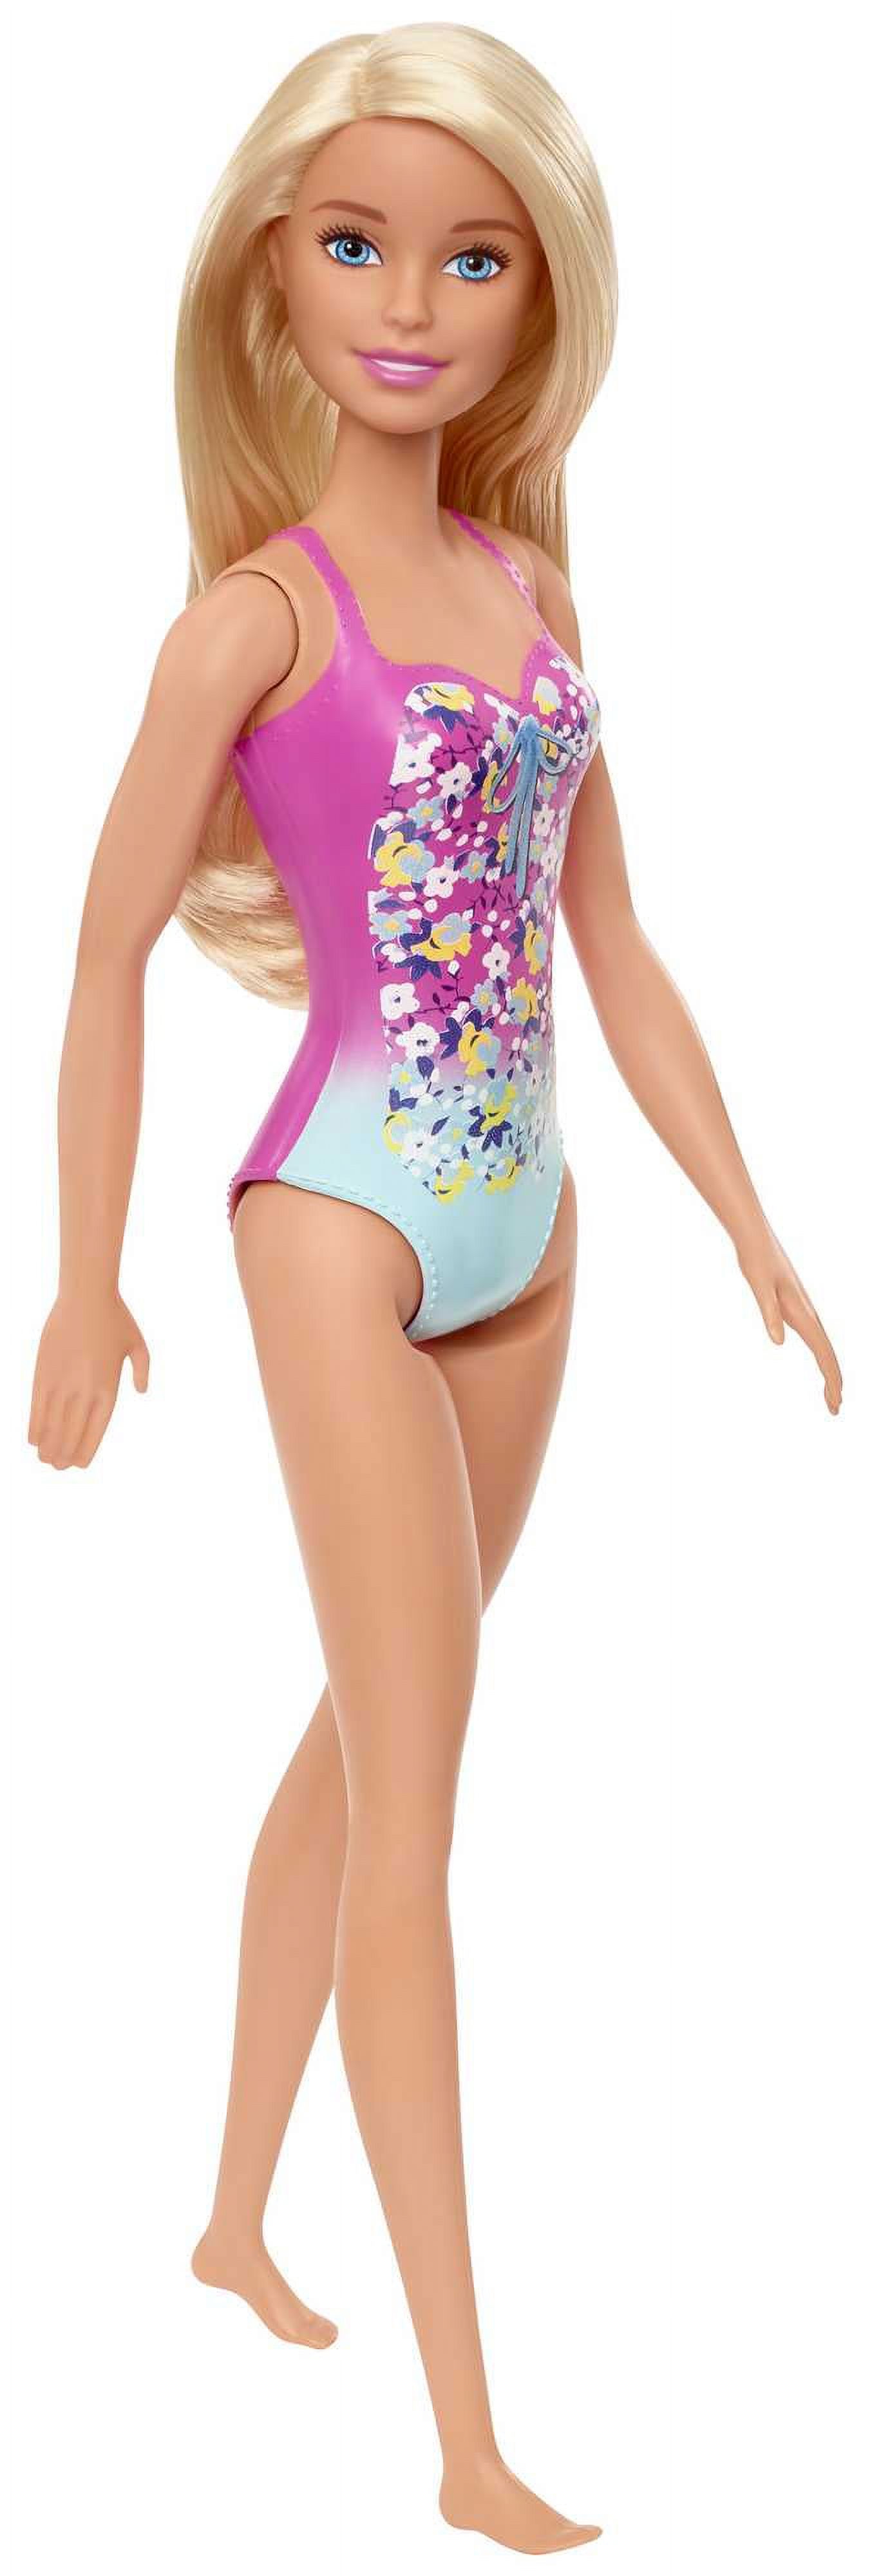 Barbie Swimsuit Beach Doll with Blonde Hair & Pink Floral Print Suit - image 1 of 6